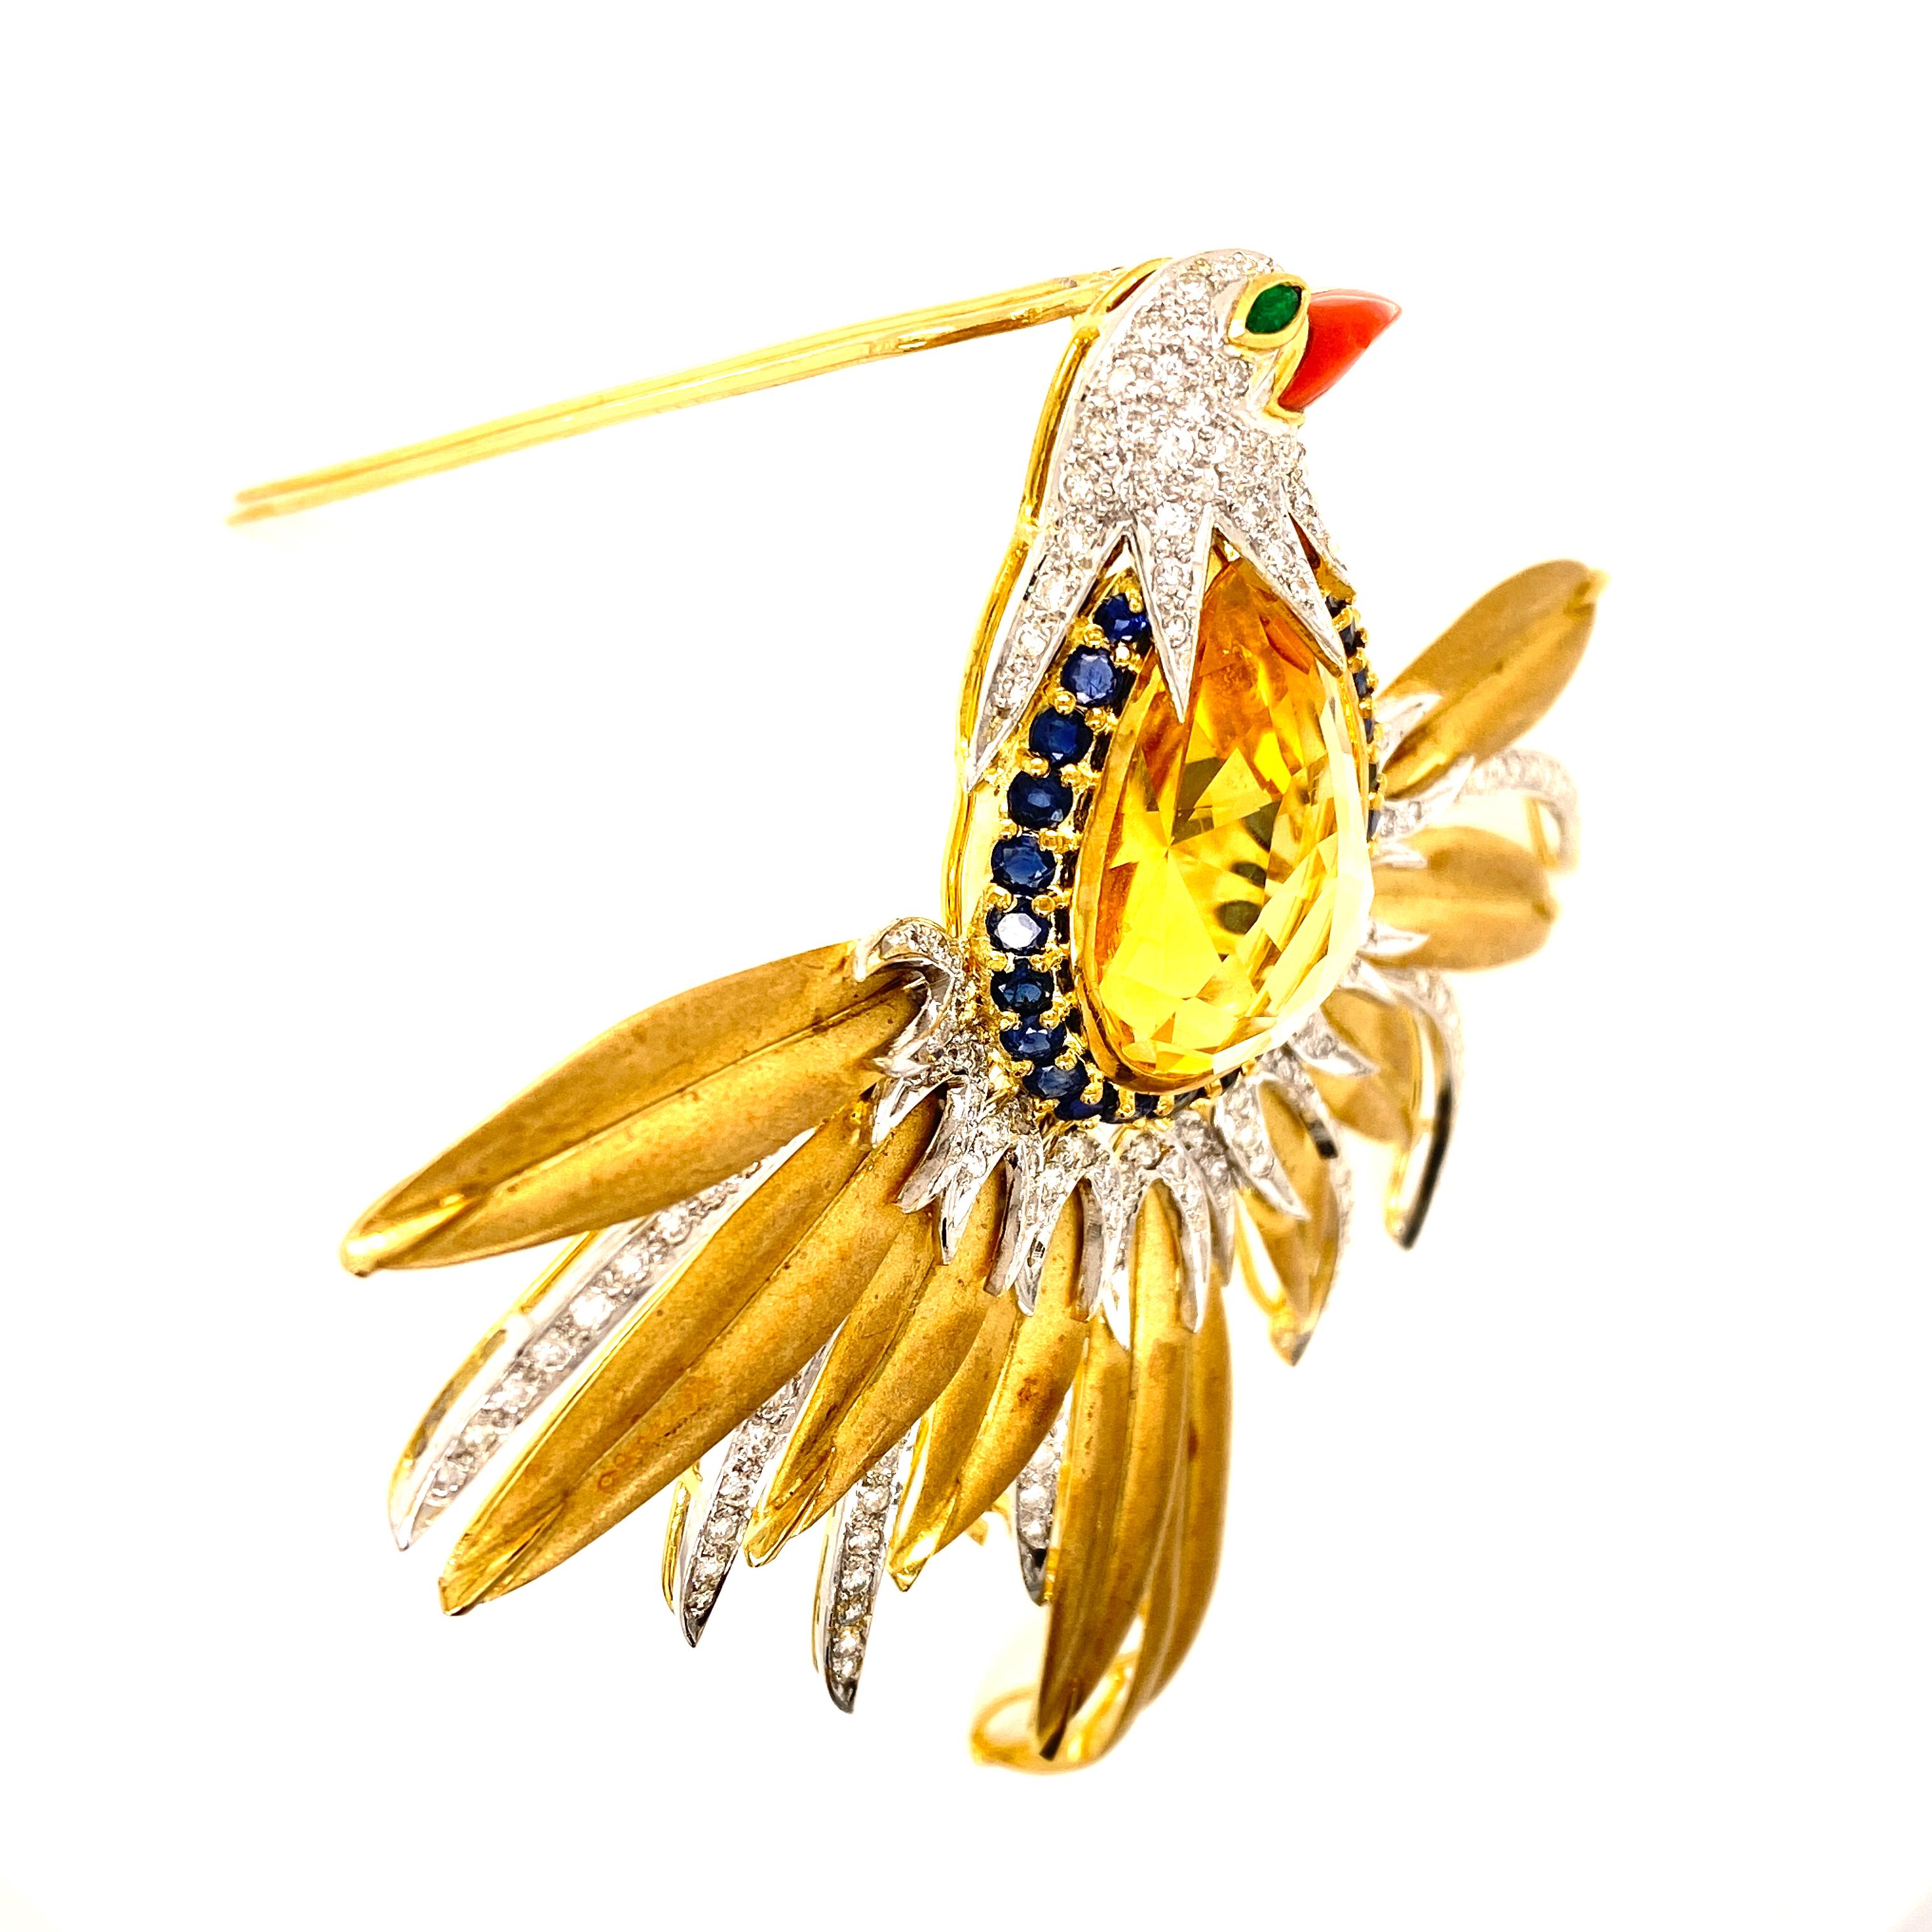 Beautiful Statement Bird Brooch fashioned in 18 karat yellow gold. This piece of art features a 26.75 carat faceted citrine gemstone as the body of the bird surrounded by sapphires, diamonds, emerald, and coral accents. The wings span 3.5 inches in